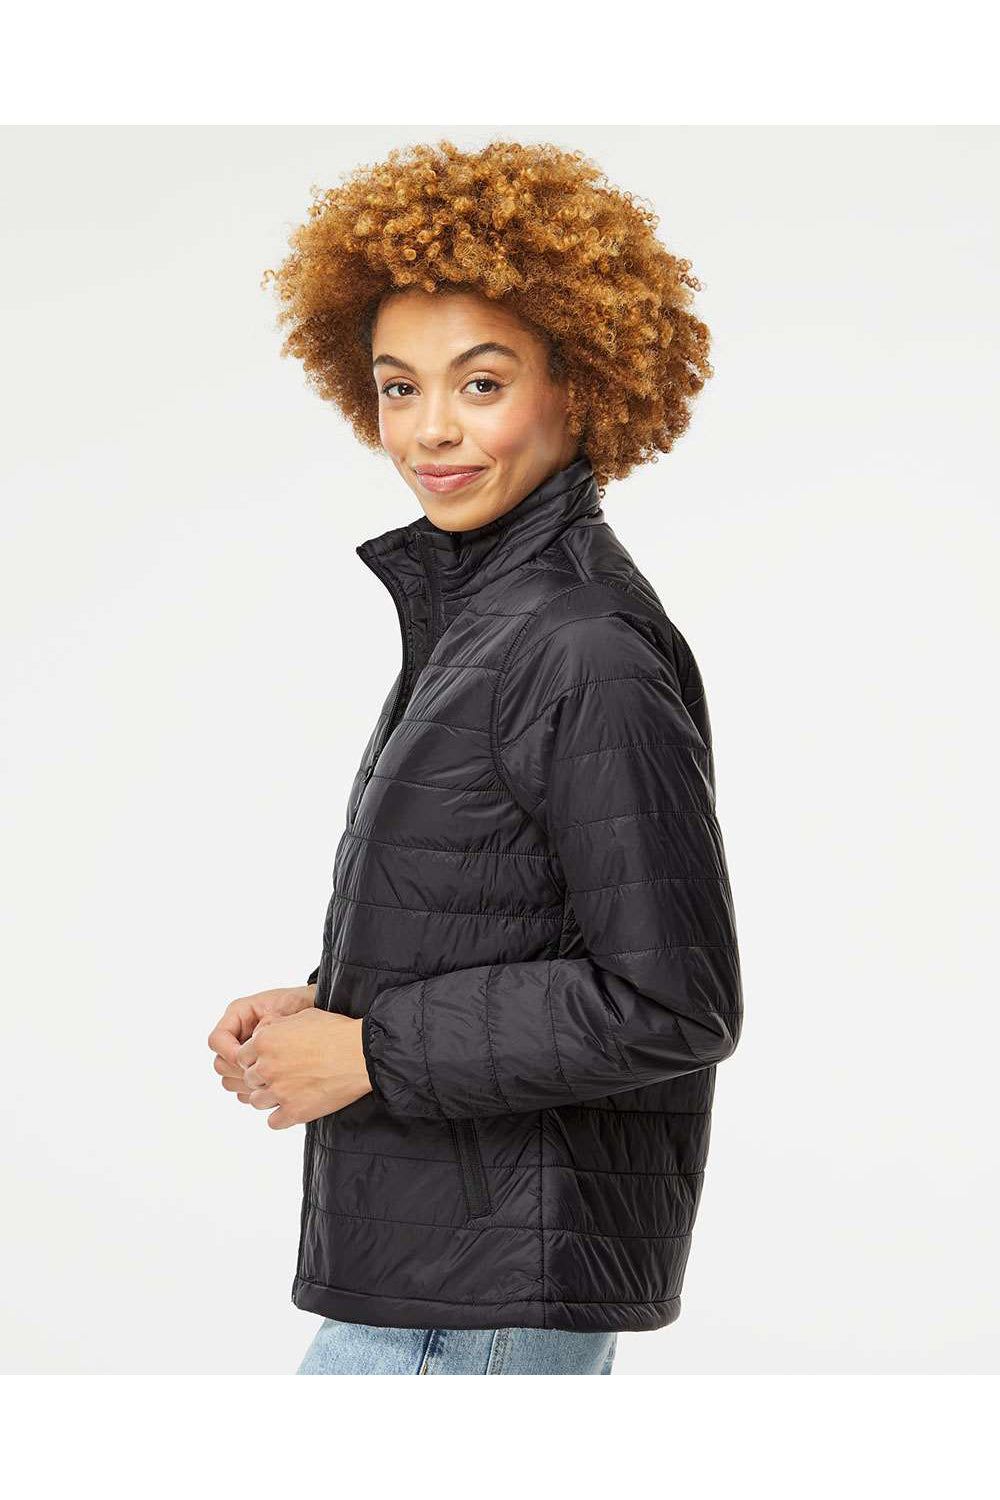 Independent Trading Co. EXP200PFZ Womens Full Zip Puffer Jacket Black Model Side